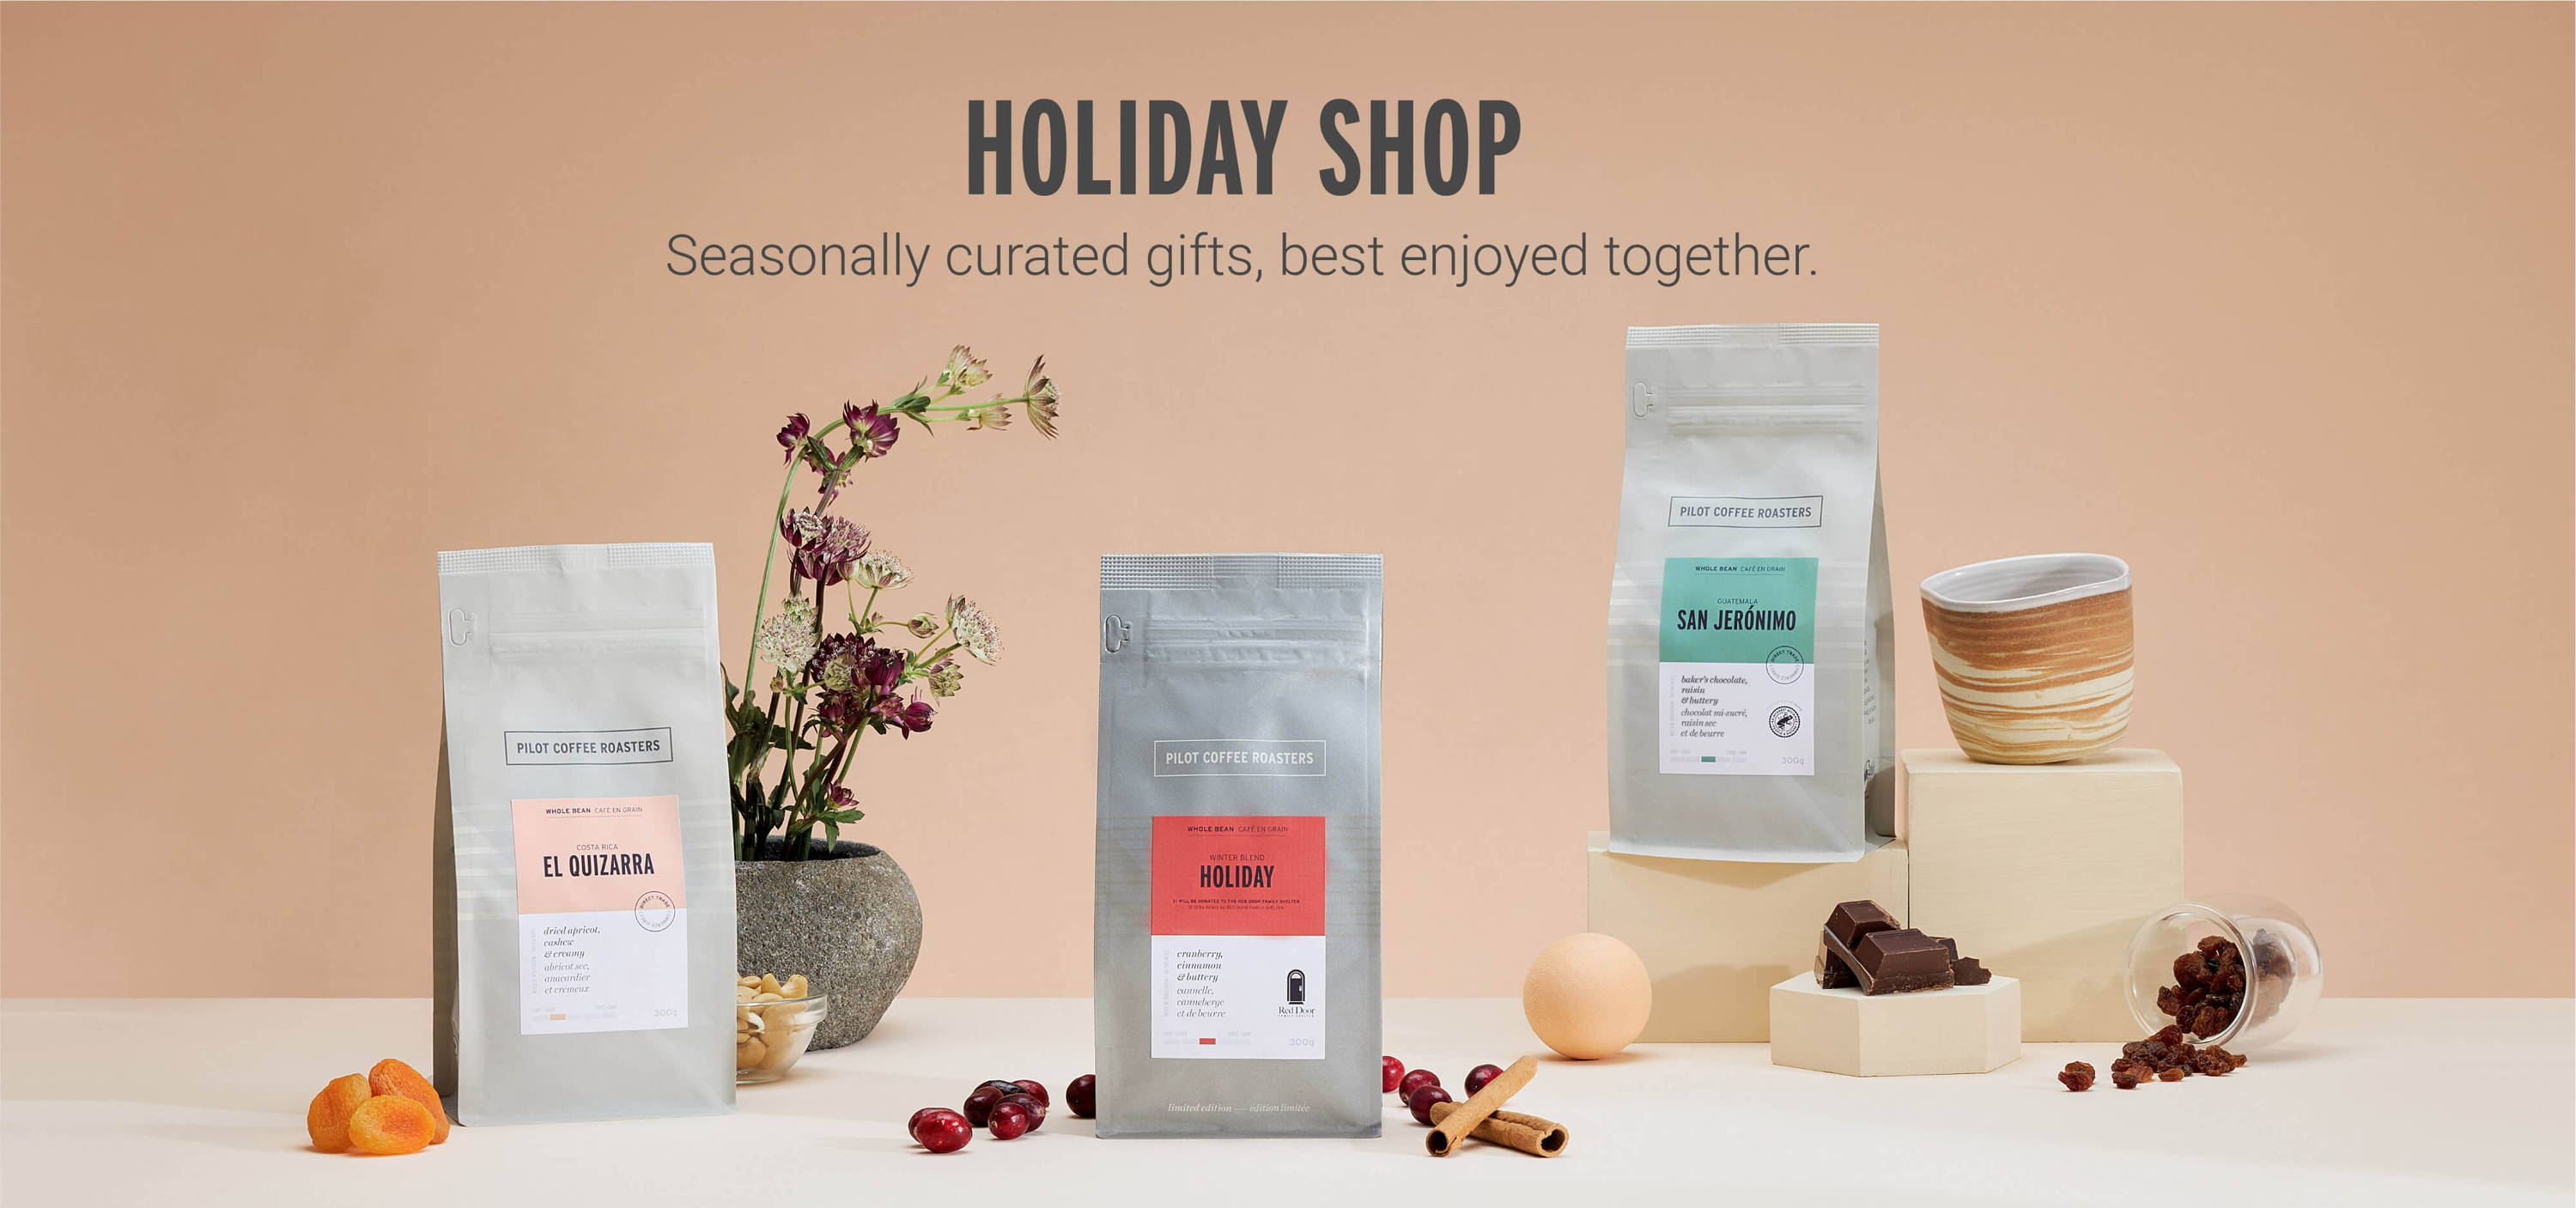 Holiday Shop. Seasonally curated gifts, best enjoyed together.